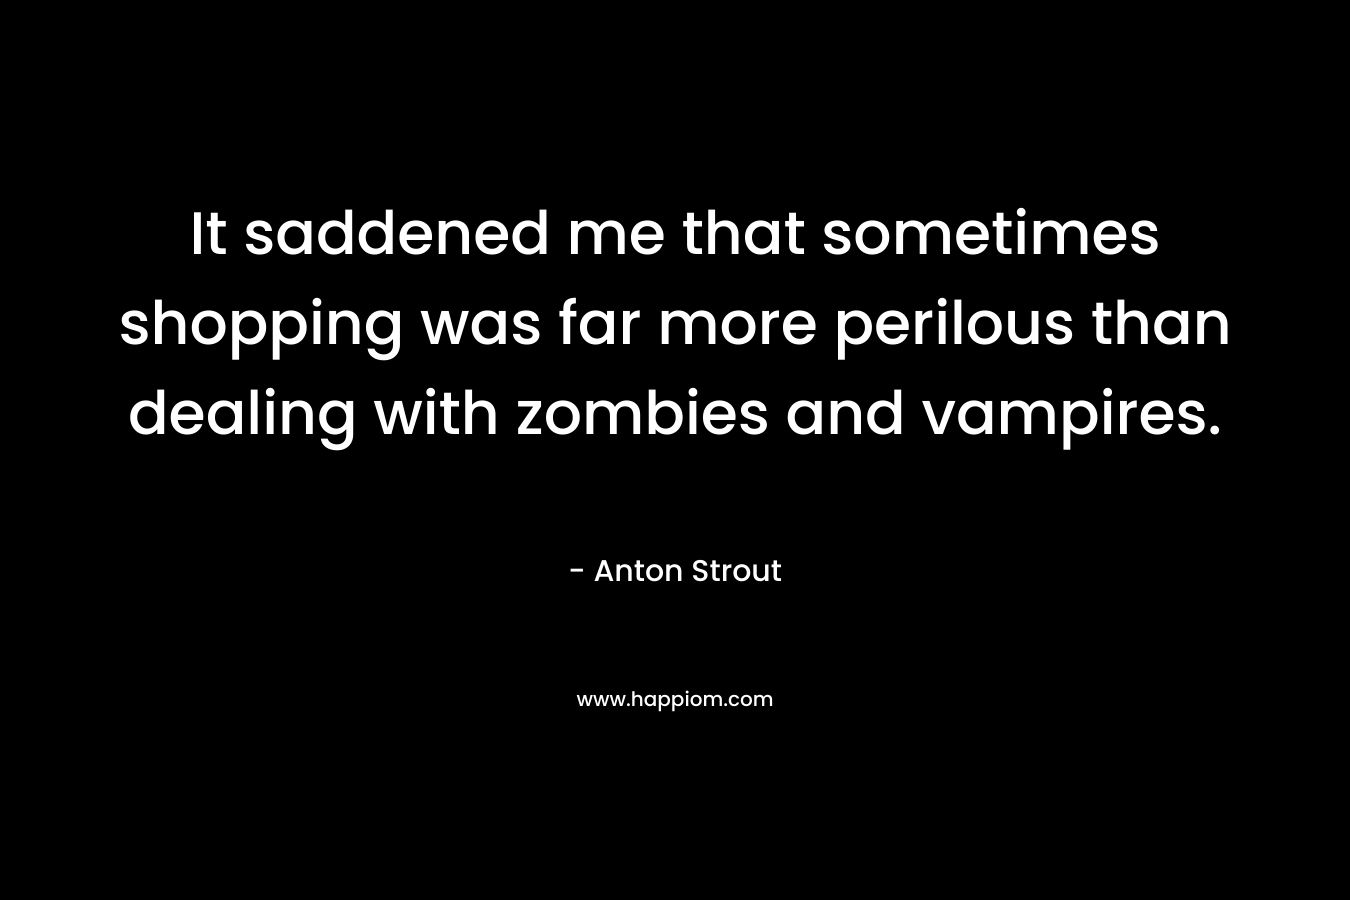 It saddened me that sometimes shopping was far more perilous than dealing with zombies and vampires. – Anton Strout